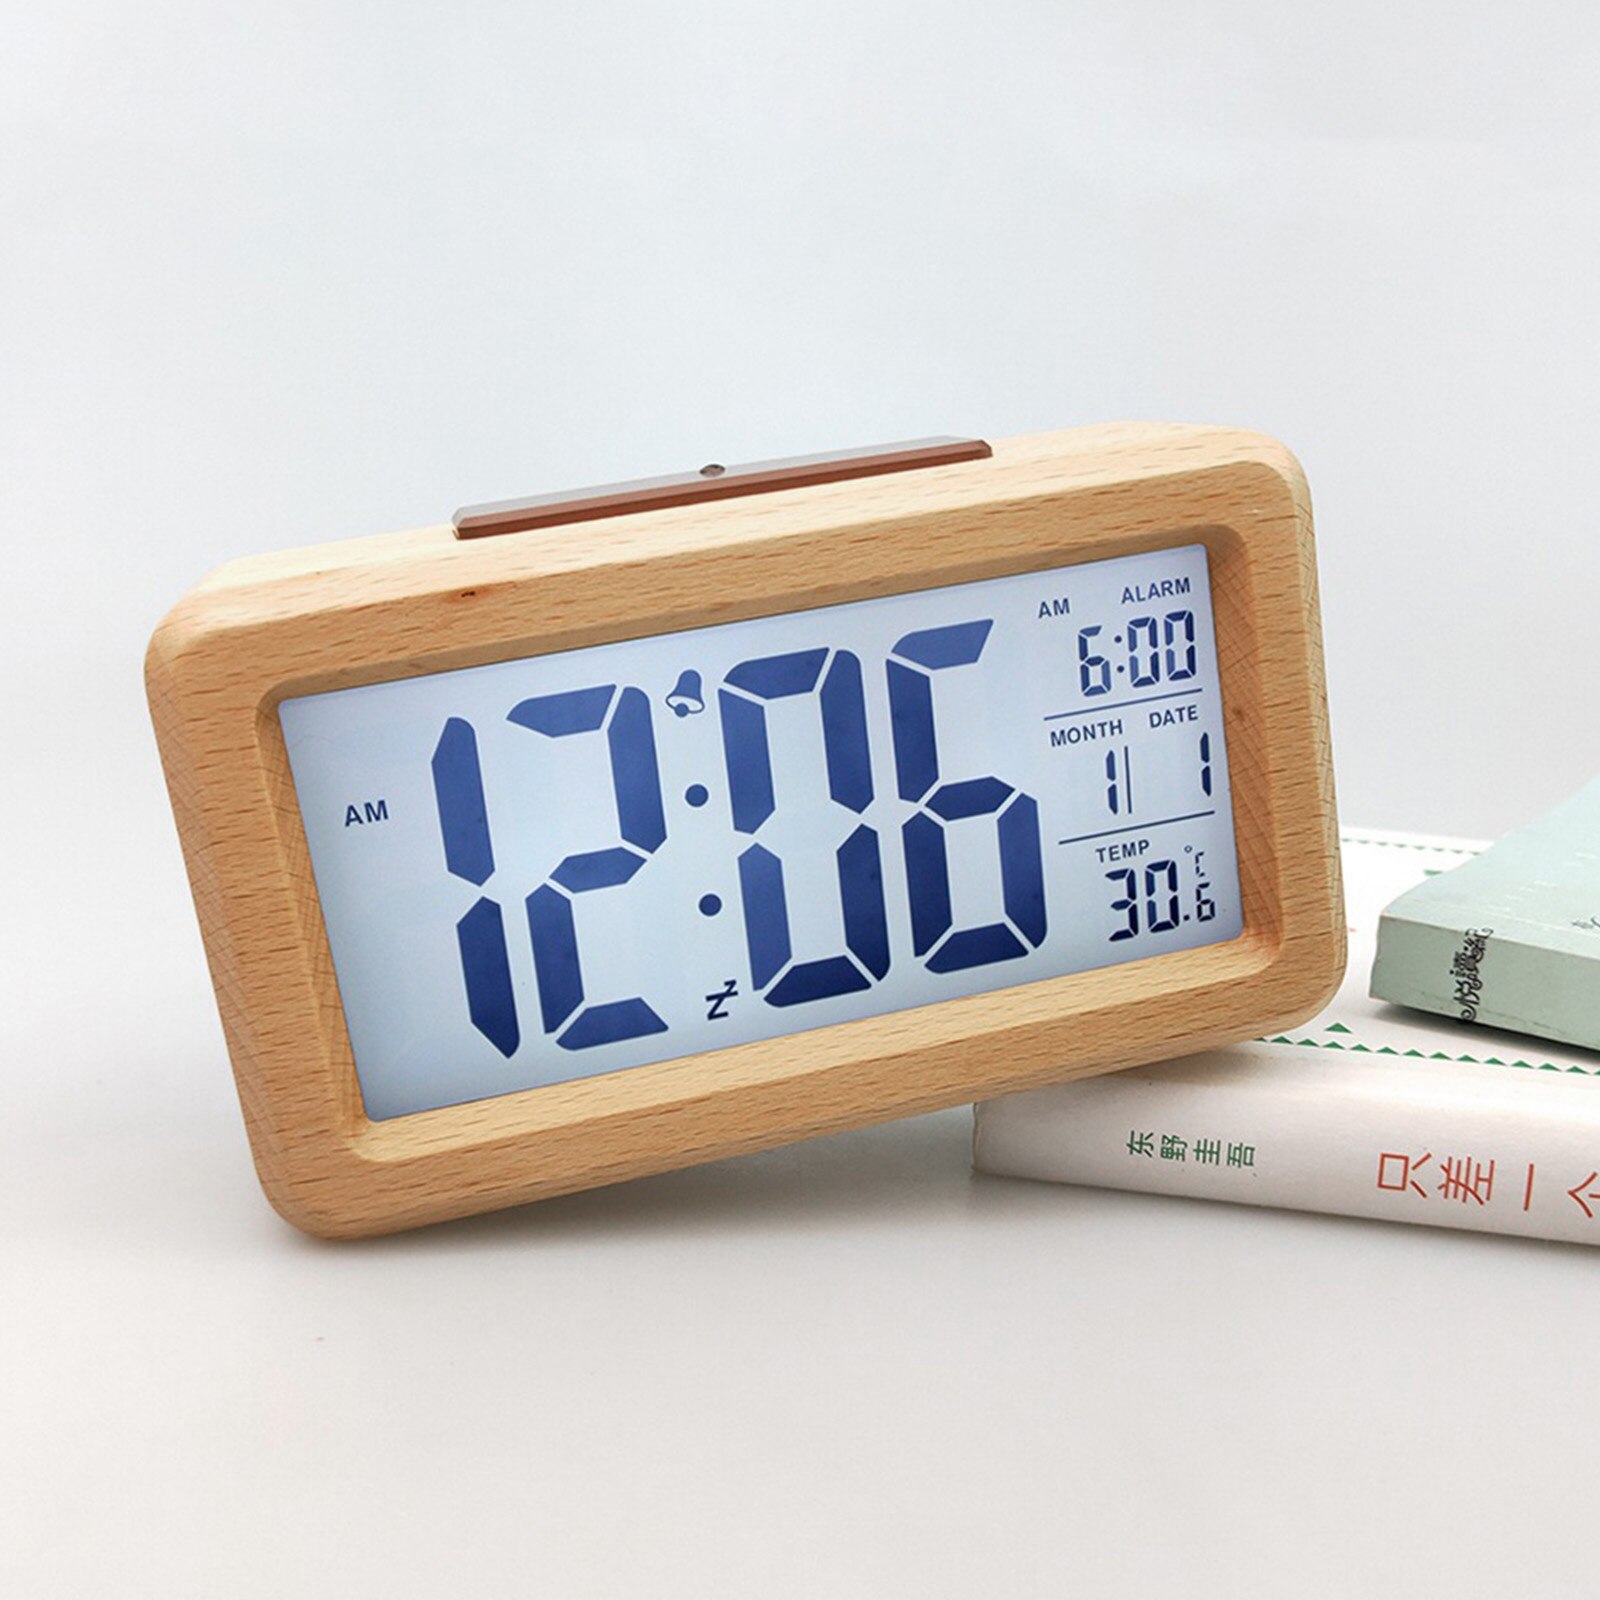 Solid Wood Log Color Digital Alarm Clock Wooden Time Display Battery Operated Smart Electronic Clocks Without Battery